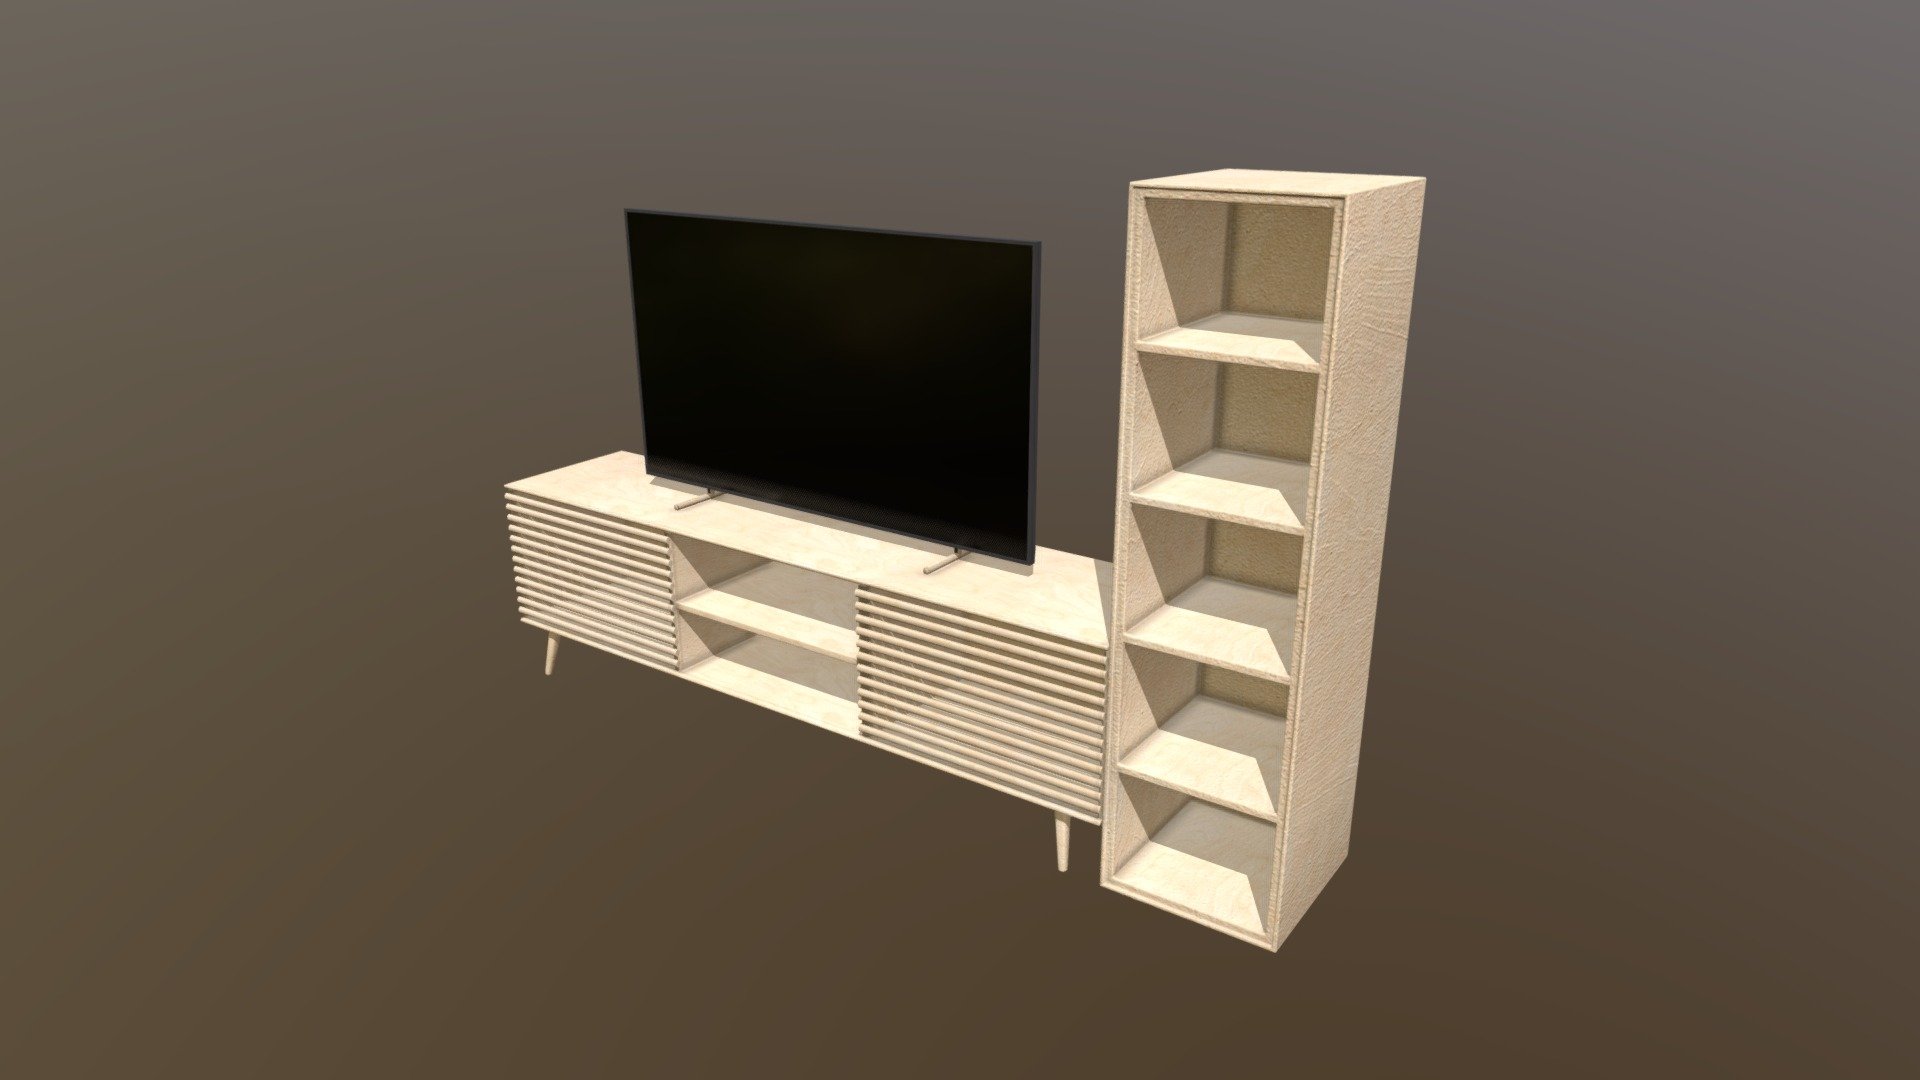 Cabinet with TV and regal furniture asset.
Game ready model or archviz ready furniture asset.
Birch material with glass and plastic TV with materials.
Modeled in Blender - Cabinet with TV and regal - Buy Royalty Free 3D model by Thomas Binder (@bindertom61) 3d model